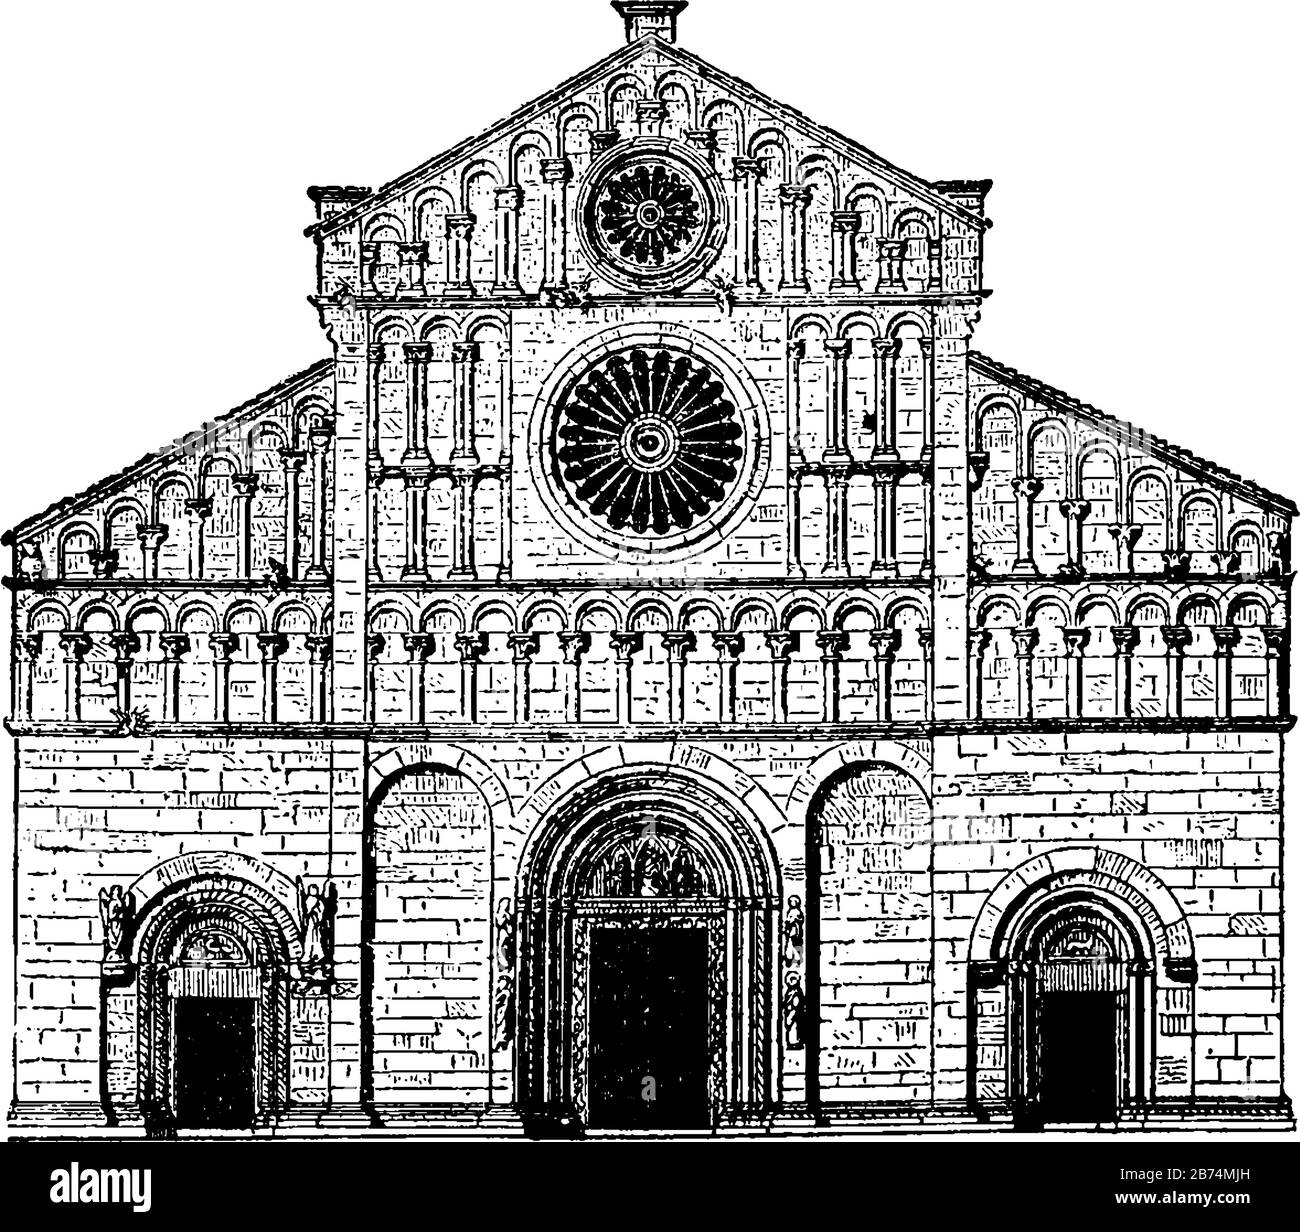 Romanesque architecture Black and White Stock Photos & Images - Alamy